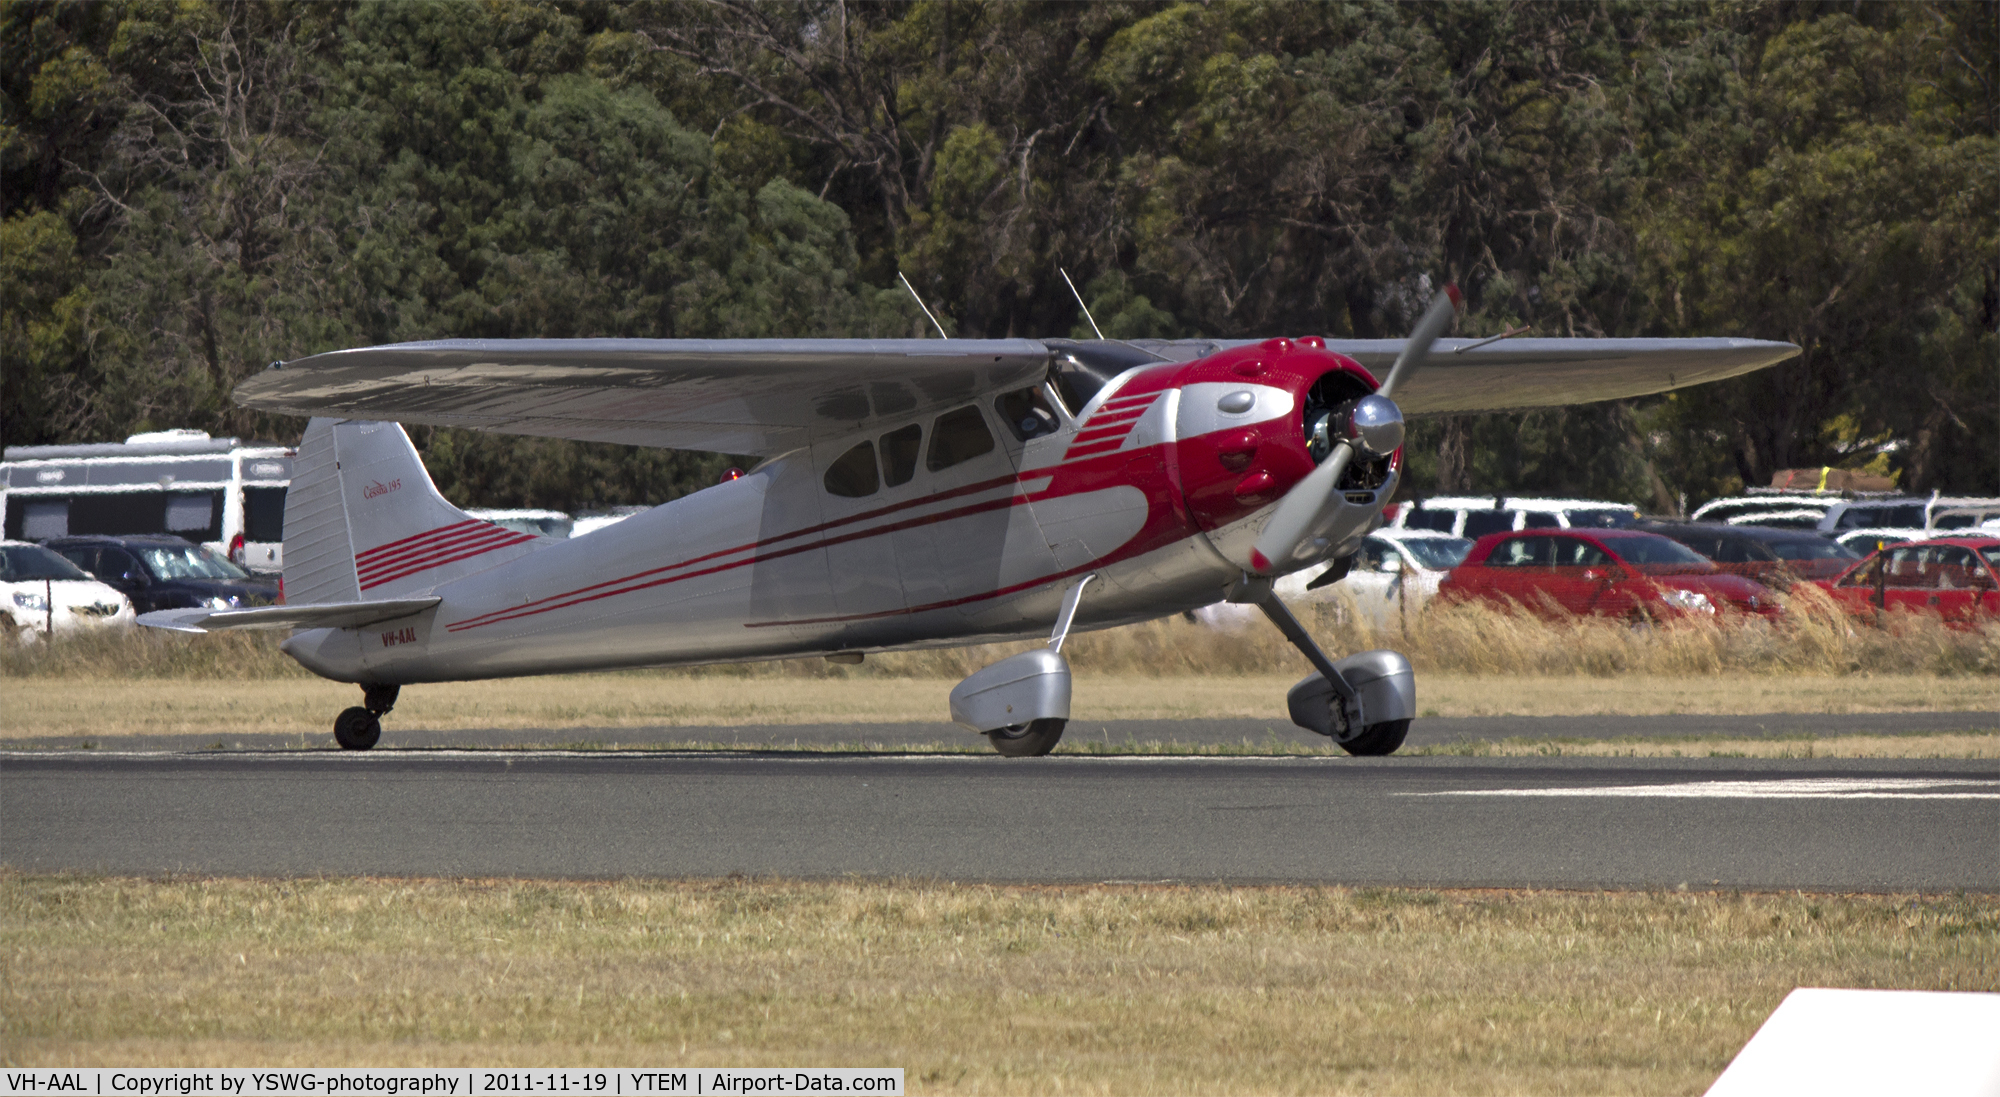 VH-AAL, 1948 Cessna 190 C/N 7129, Cessna 190 getting ready for take off on Runway 36 during the Warbirds Downunder Airshow at Temora.